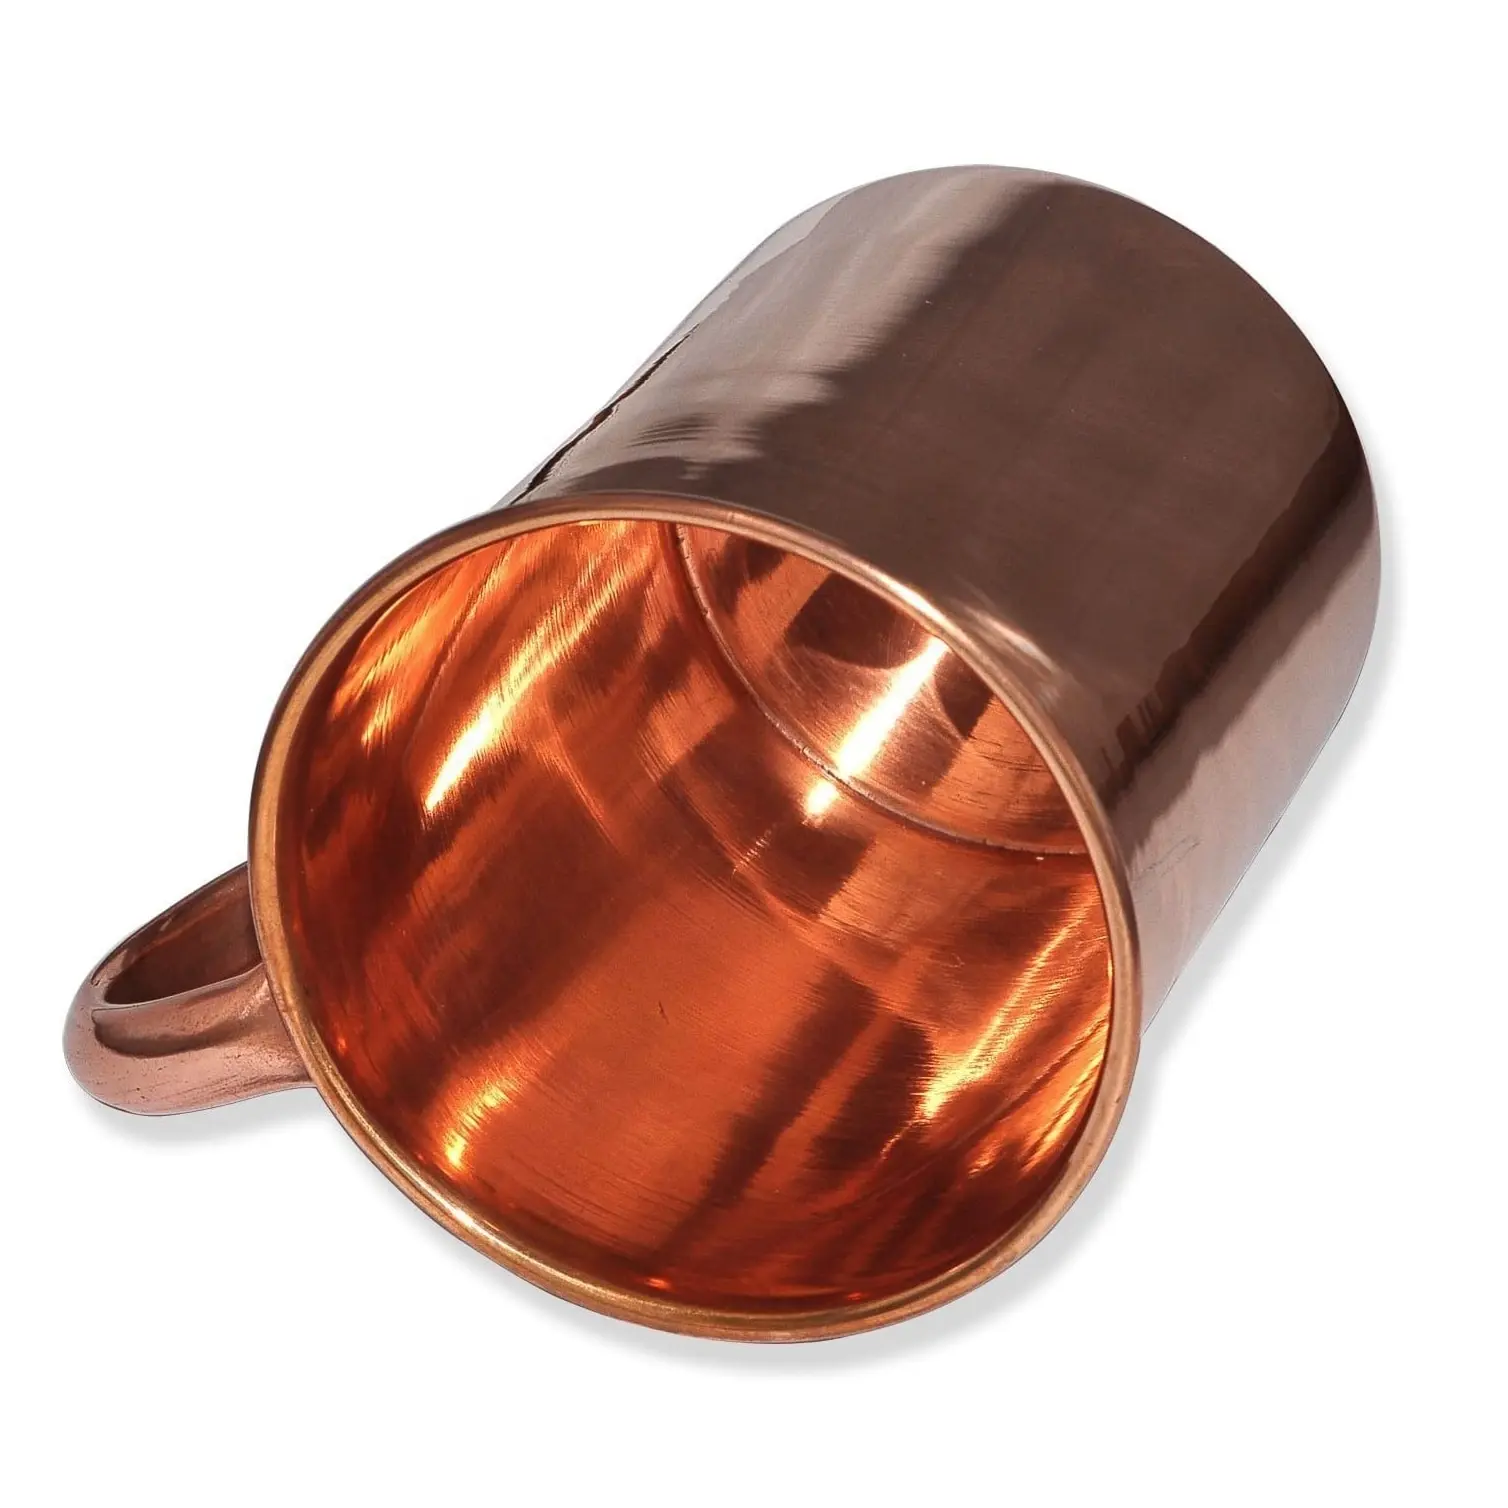 Wonder Care Moscow Mule Handmade Pure Copper Copper Mug for Any Chilled Beverage for Women and Men Wholesale Mug High Purchasing